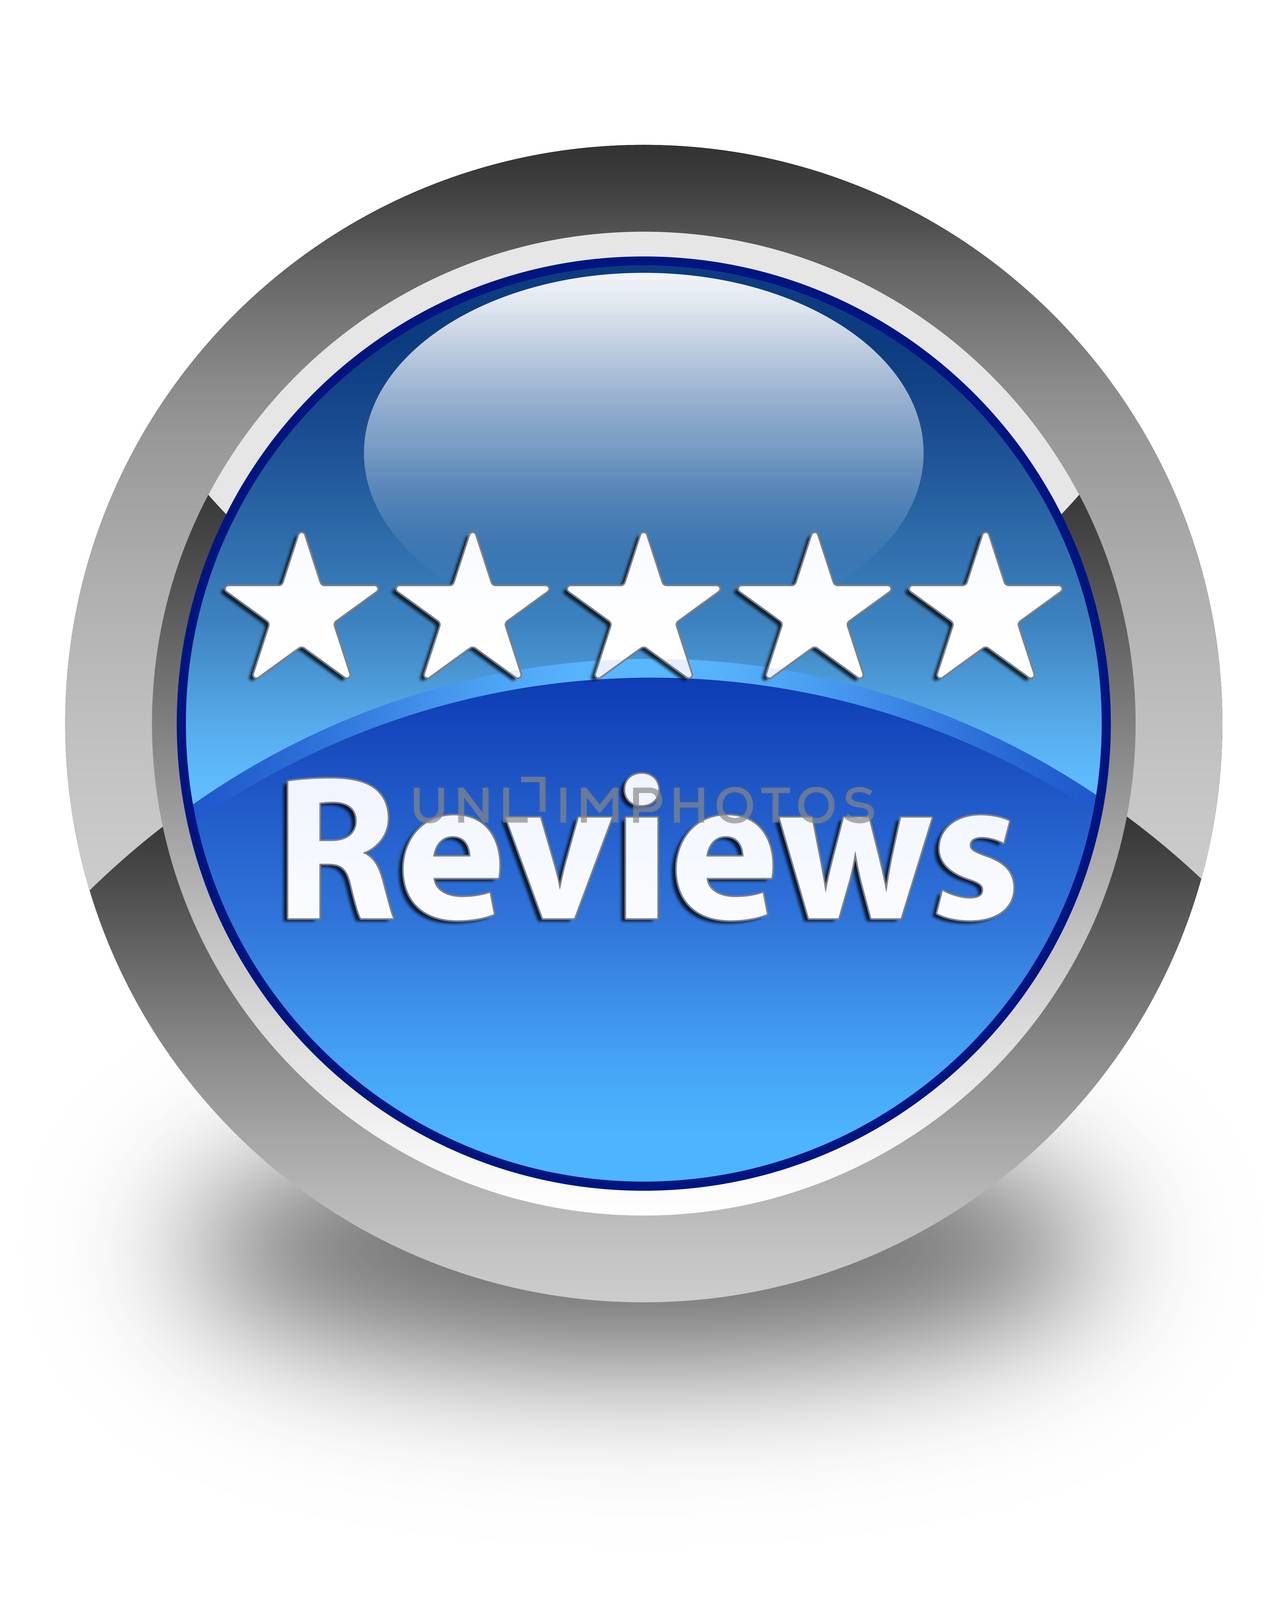 Reviews glossy blue round button